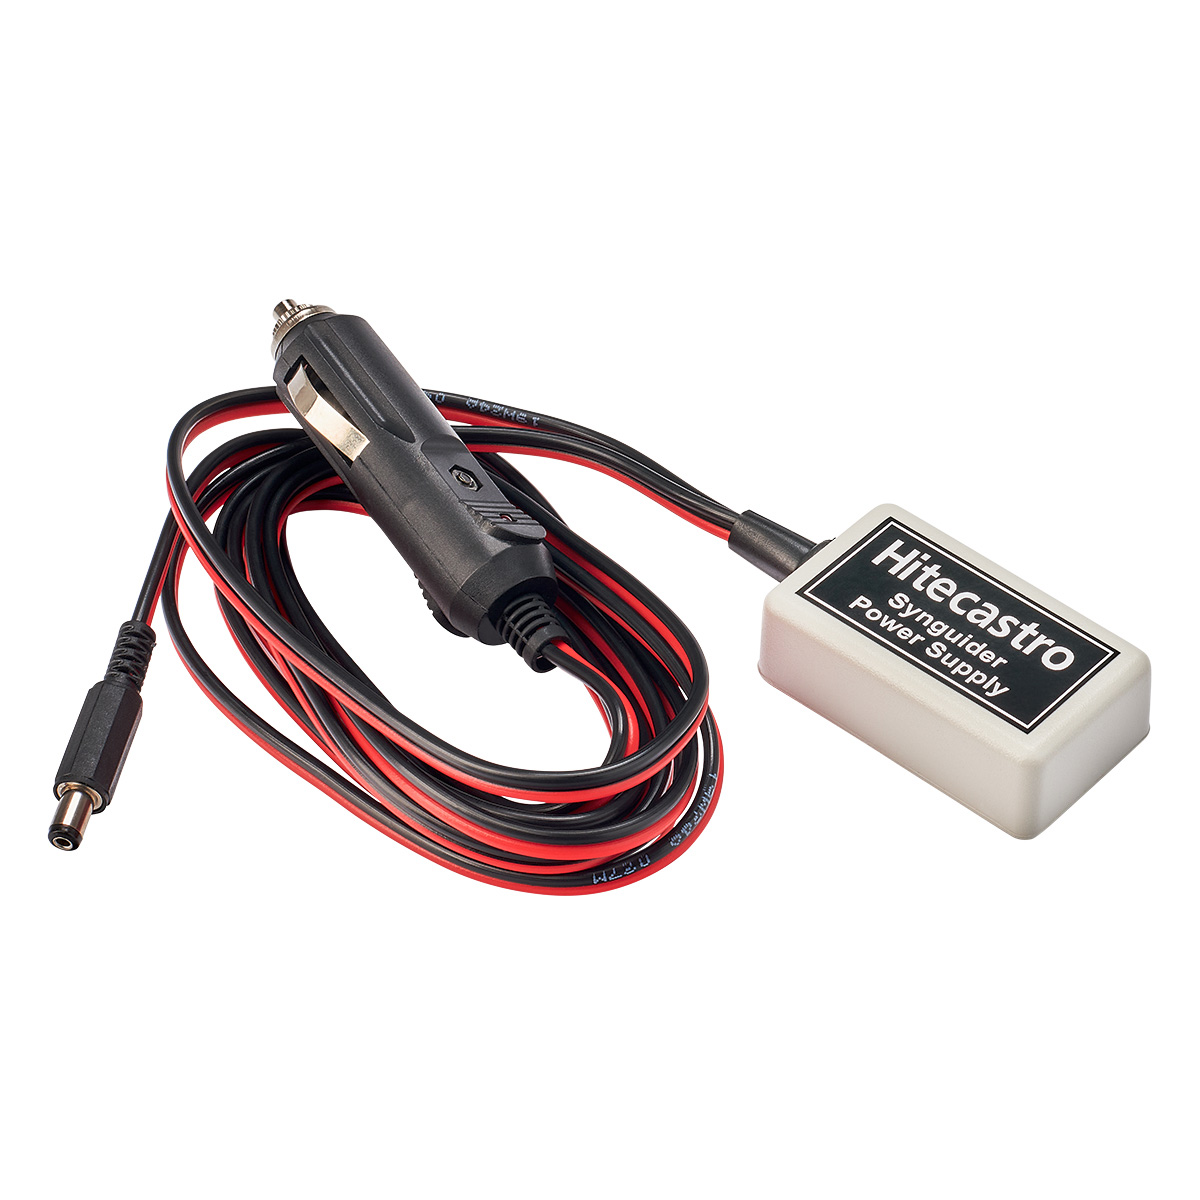 HitecAstro Power Supply for Sky-Watcher Synguider